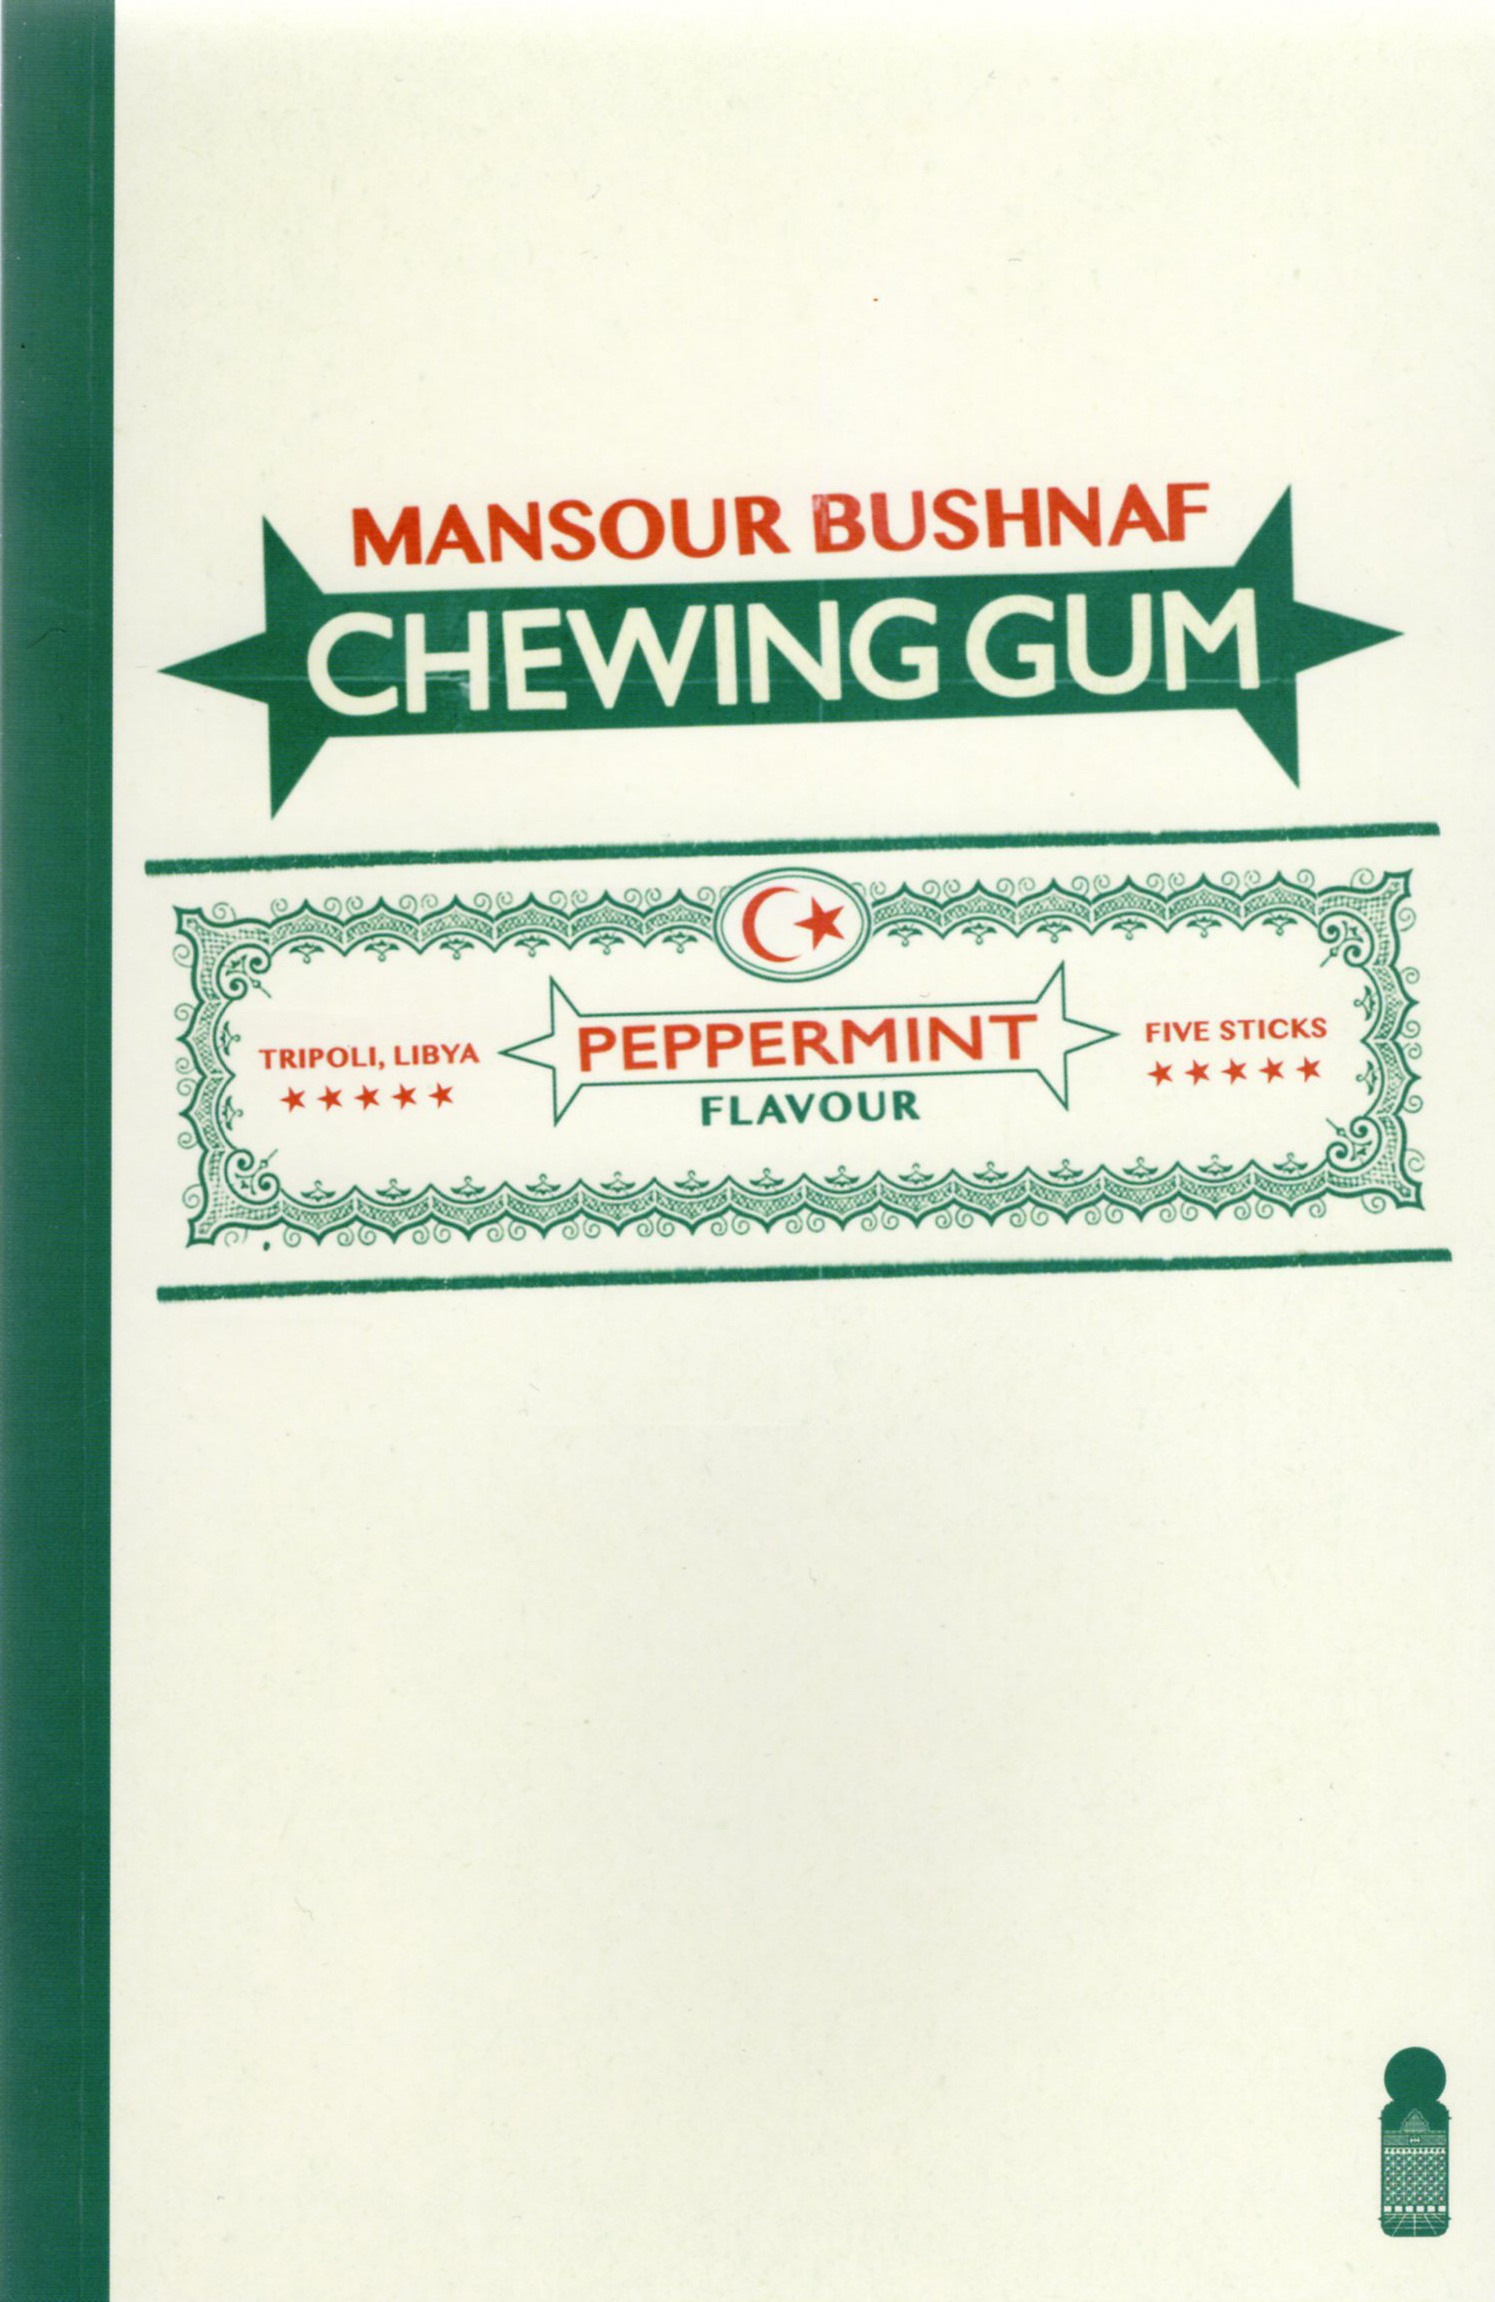 Chewinggum_book cover